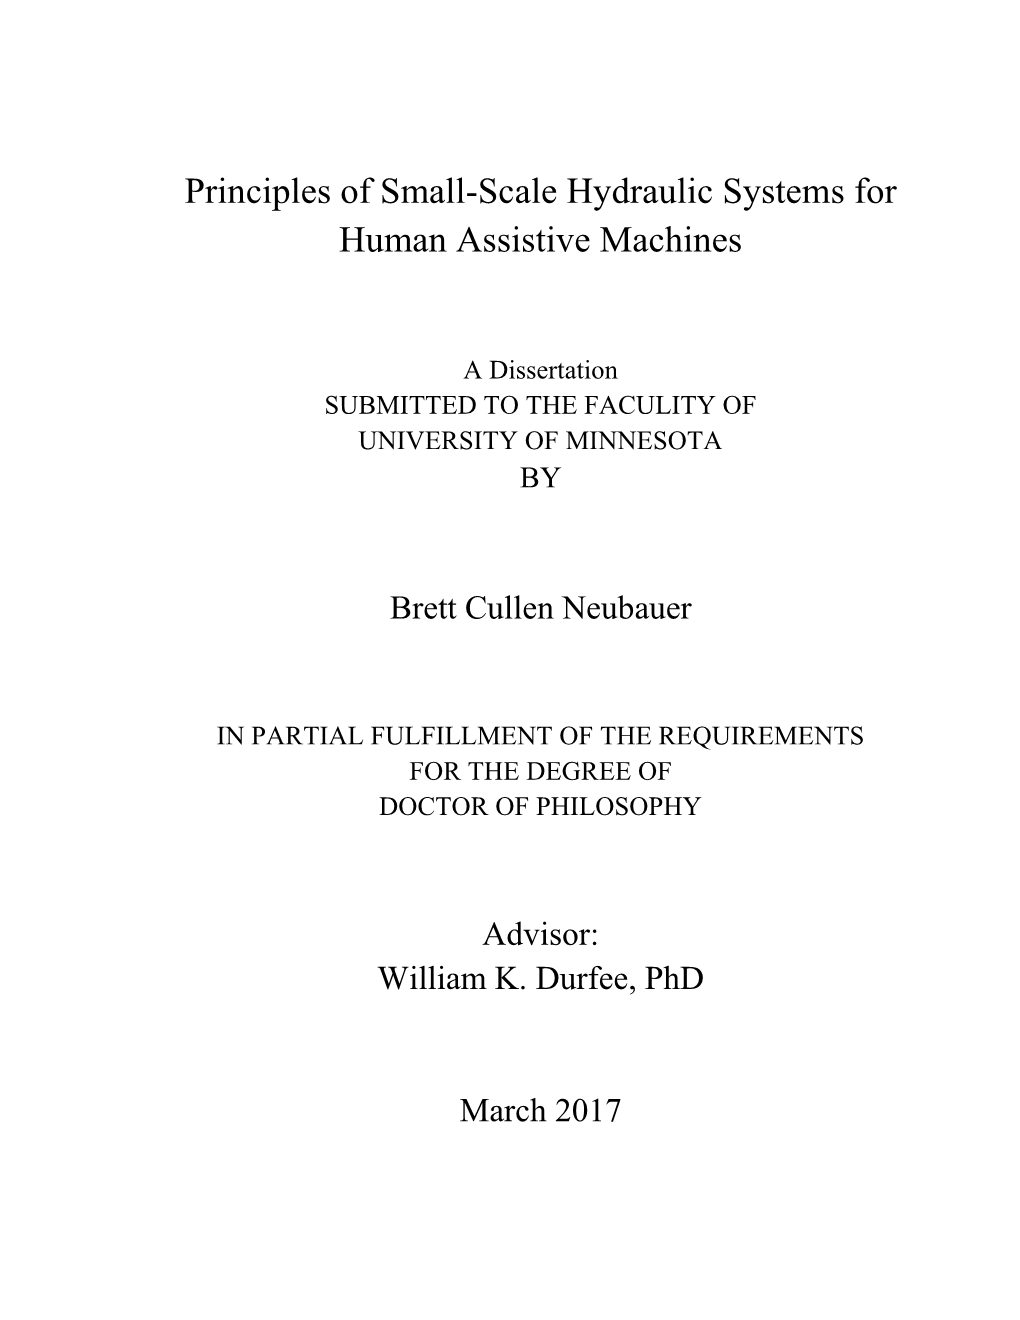 Principles of Small-Scale Hydraulic Systems for Human Assistive Machines